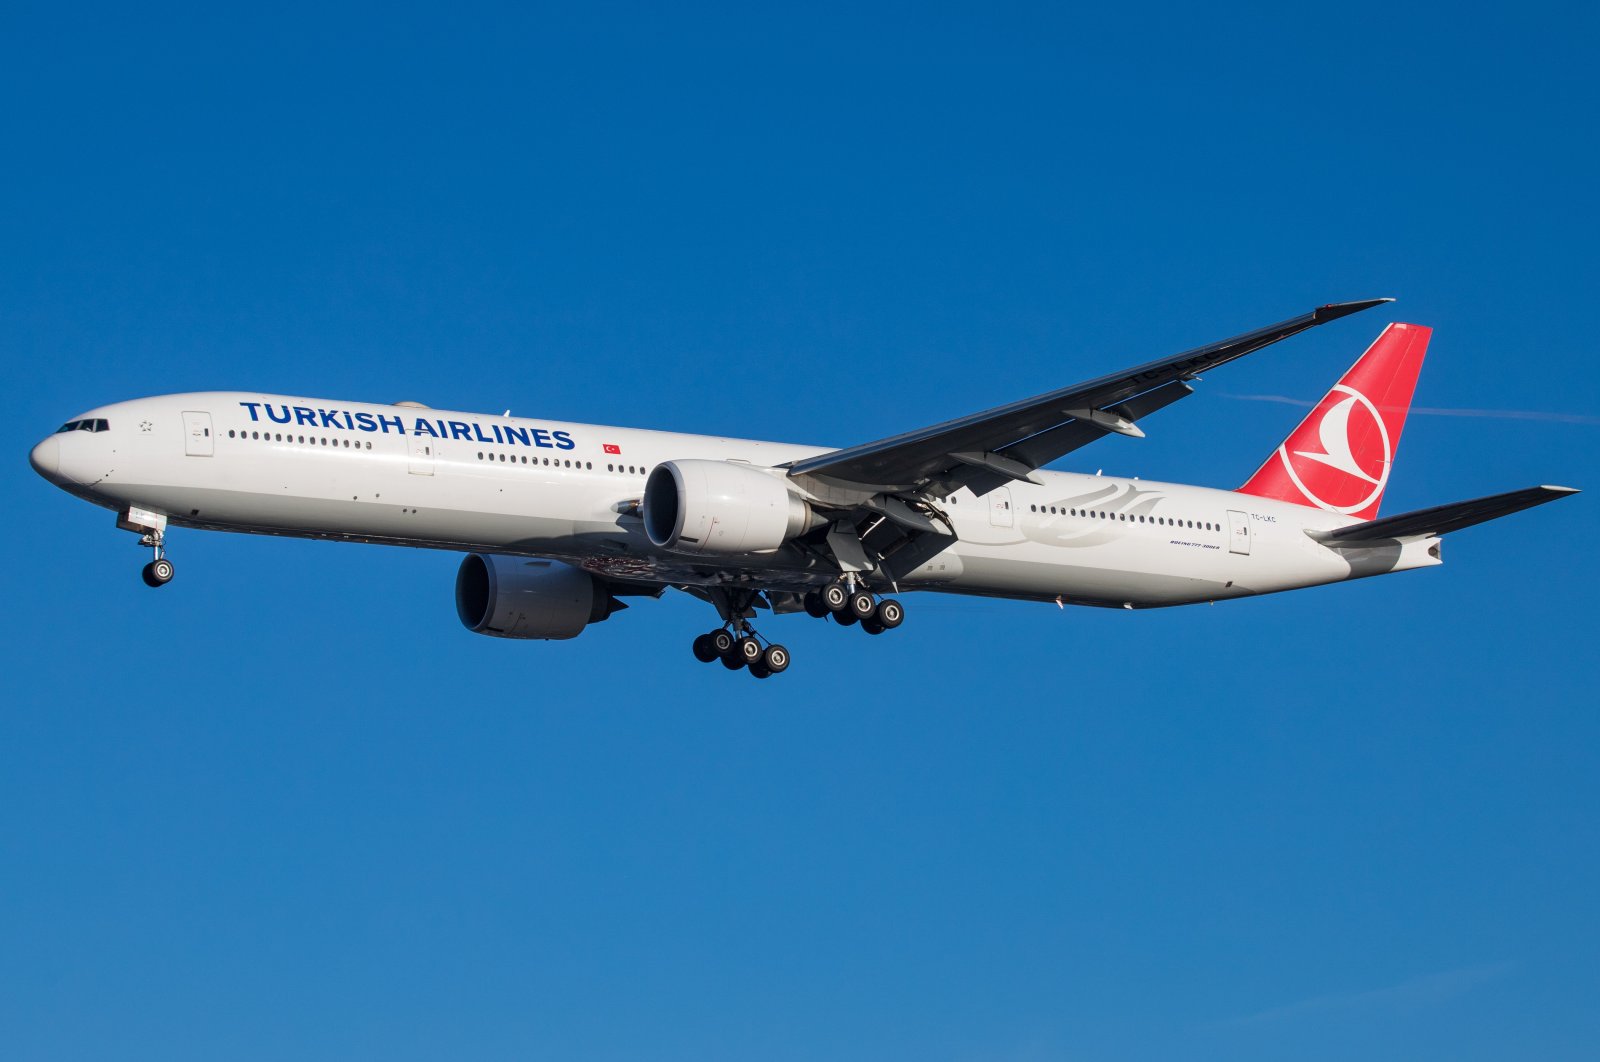 Turkish Airlines Boeing 777-300 landing at London Heathrow Airport (LHR / EGLL ) in England, U.K. in this undated file photo. (Reuters File Photo)